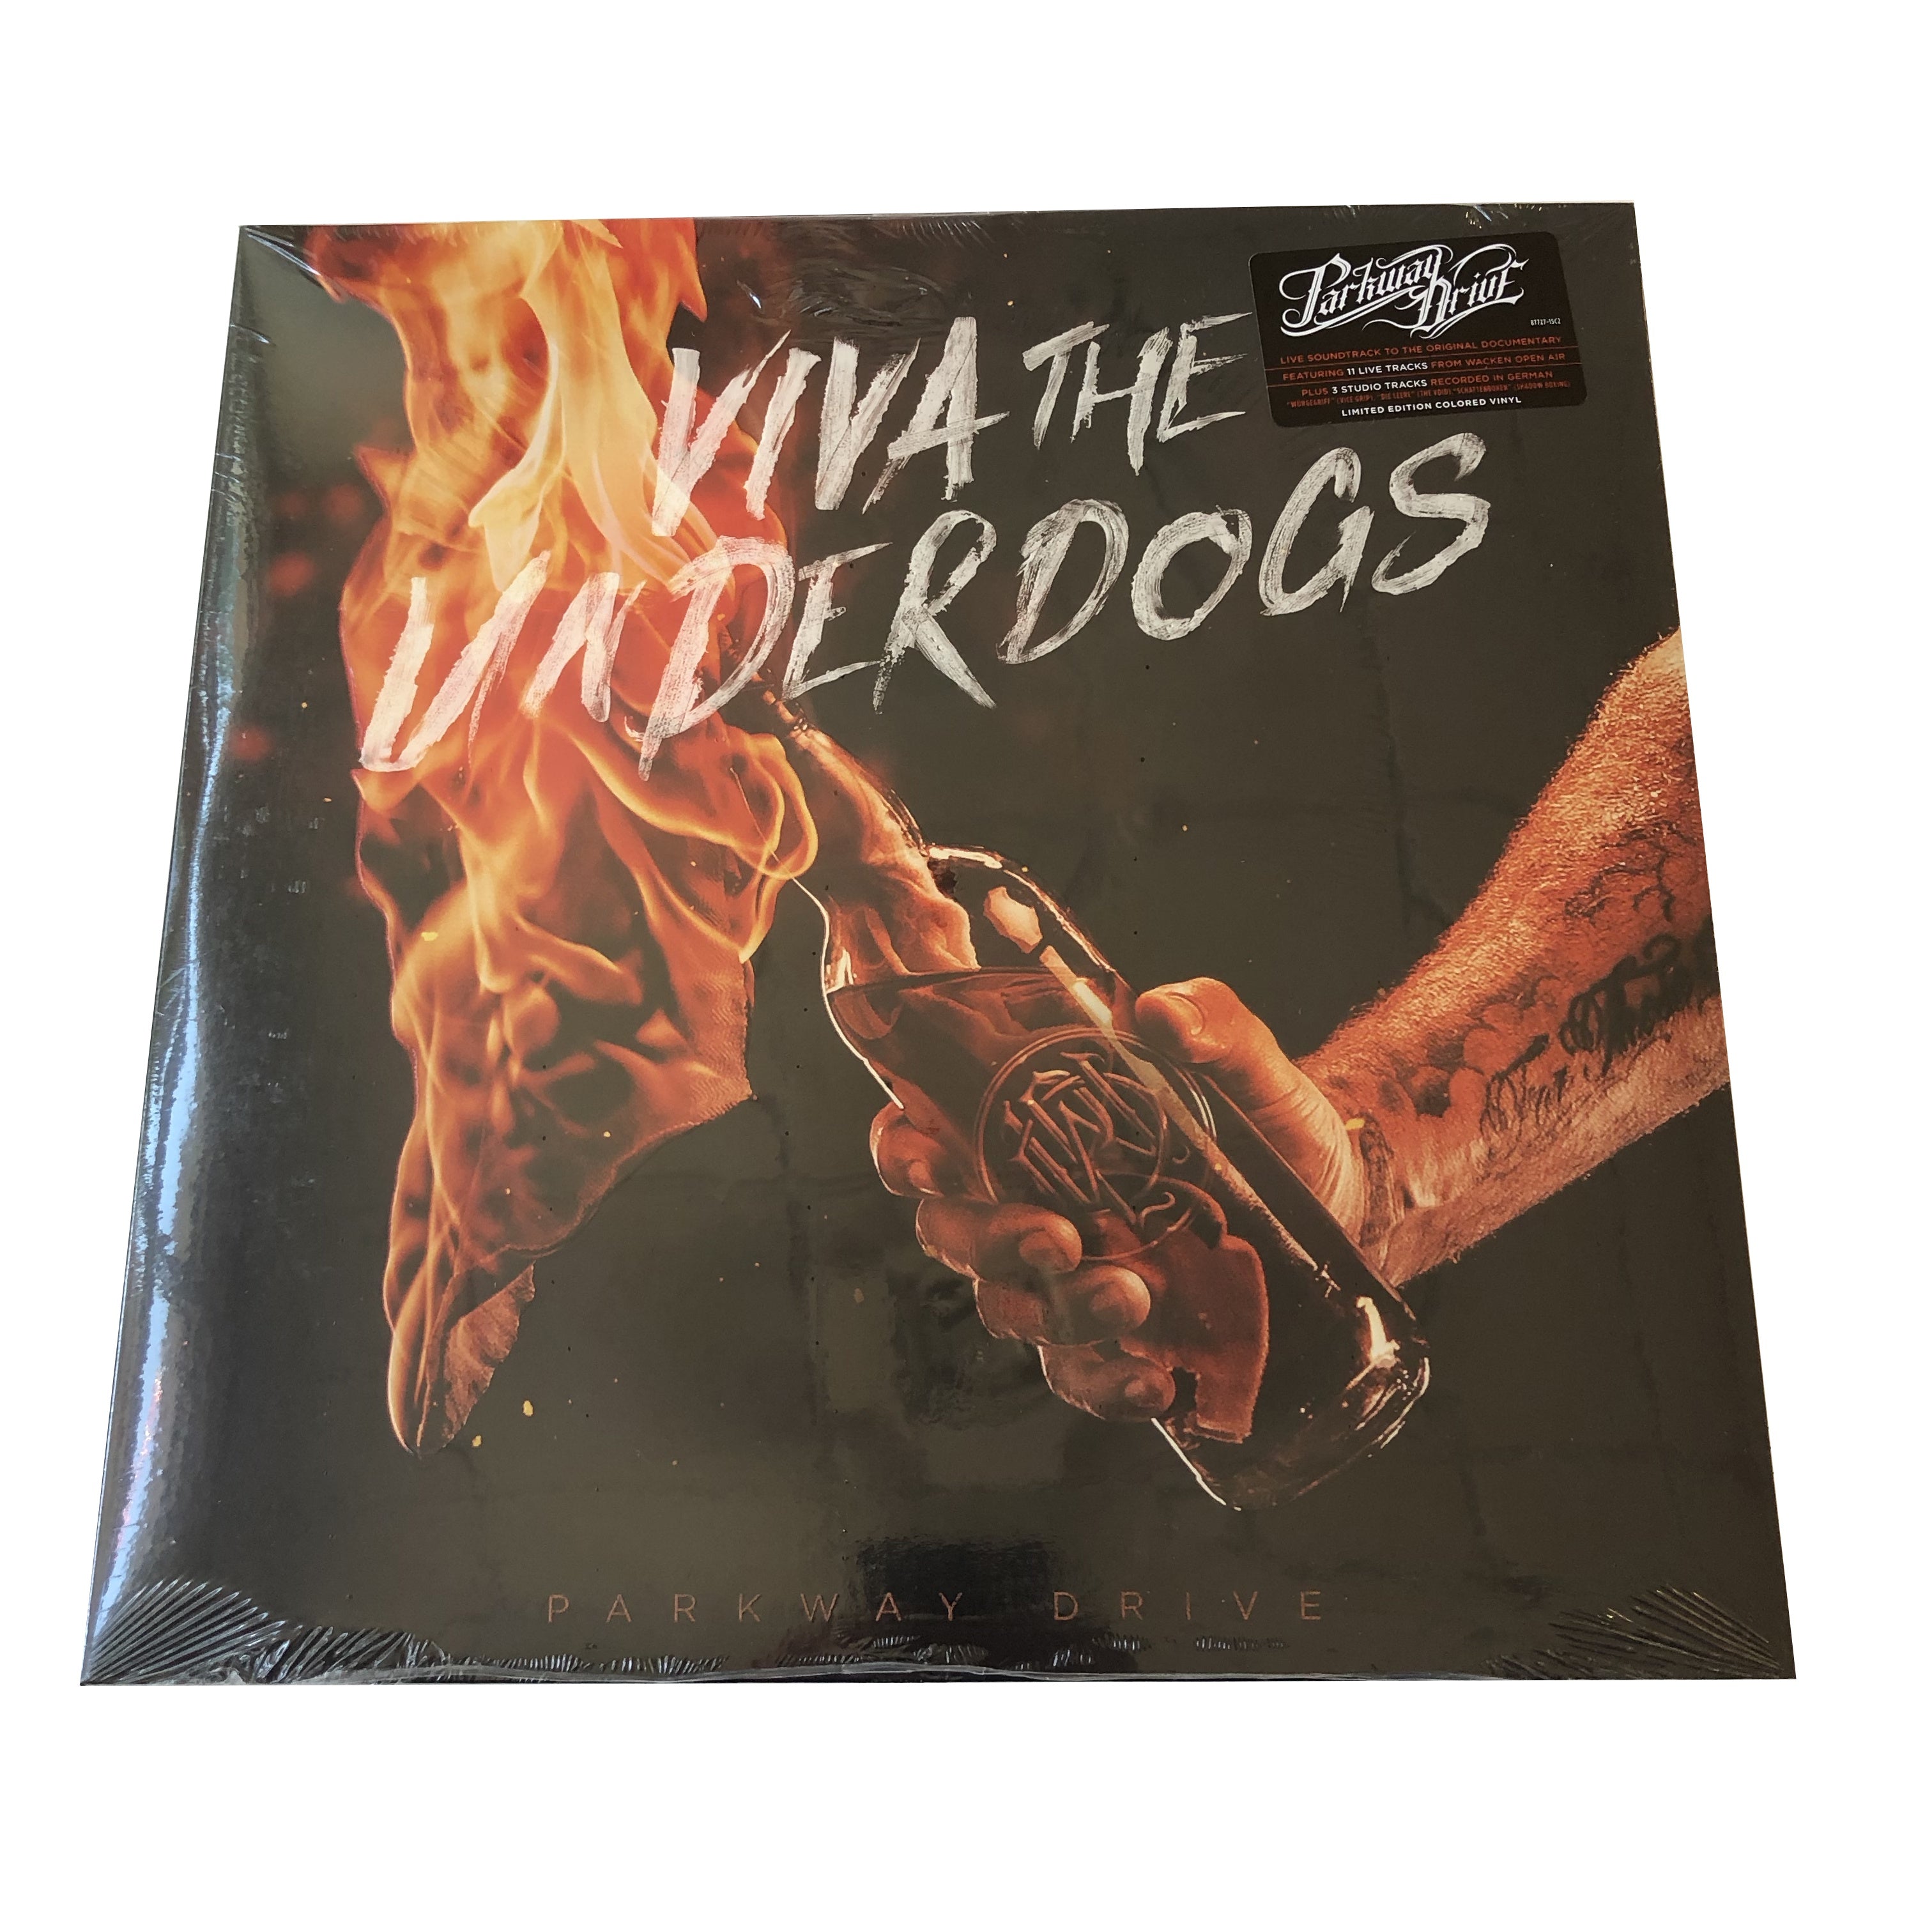 Parkway Drive: Viva the Underdogs 12 – Sorry State Records